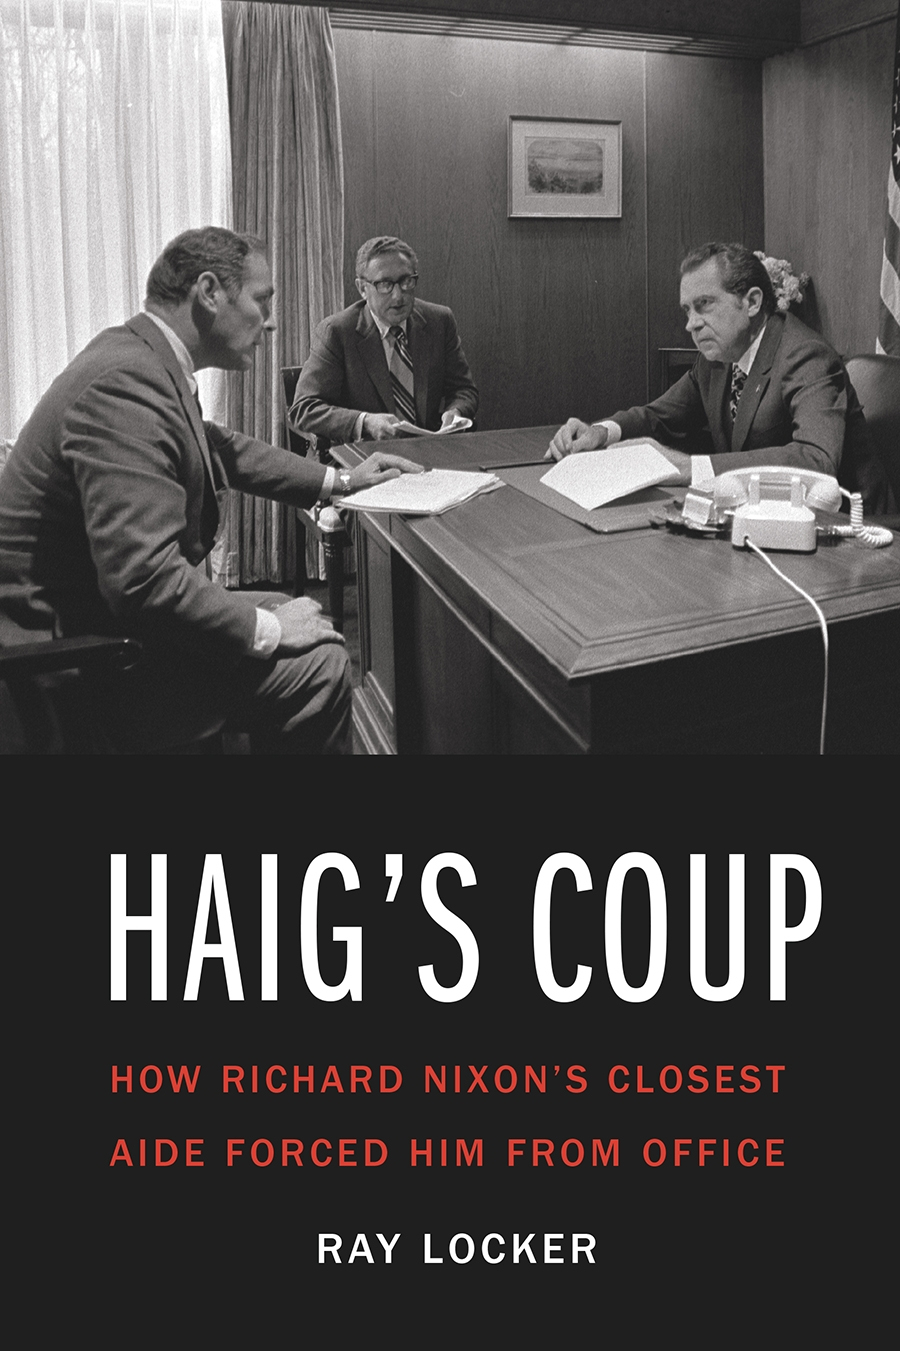 Review of Haig's Coup